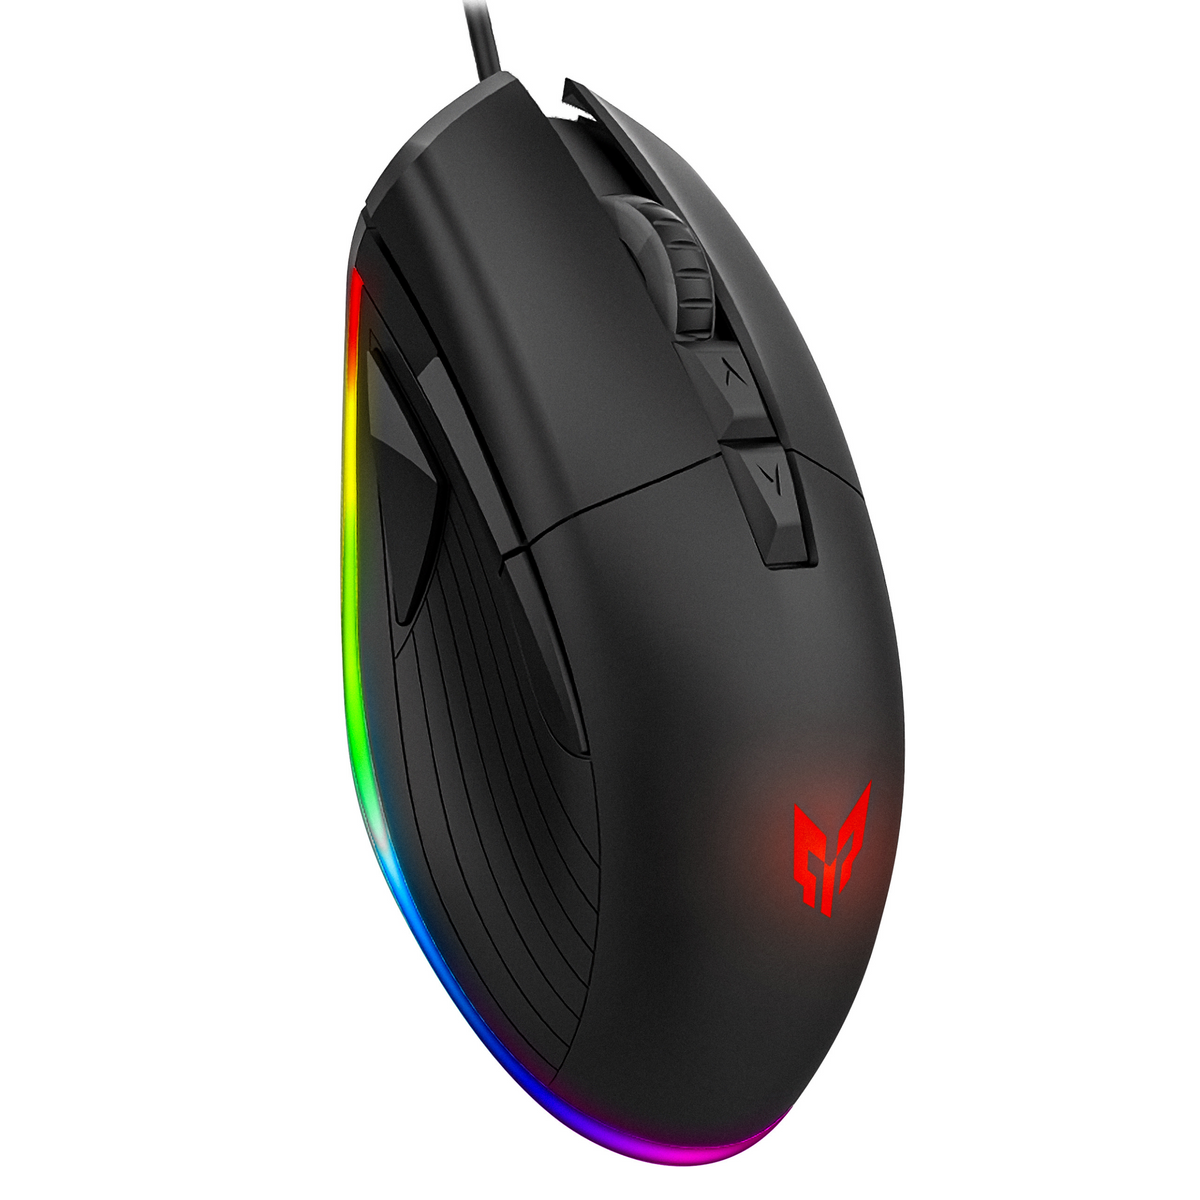 The Mysterious Gamer MX1 Elite Gaming Mouse 3389 Pixart